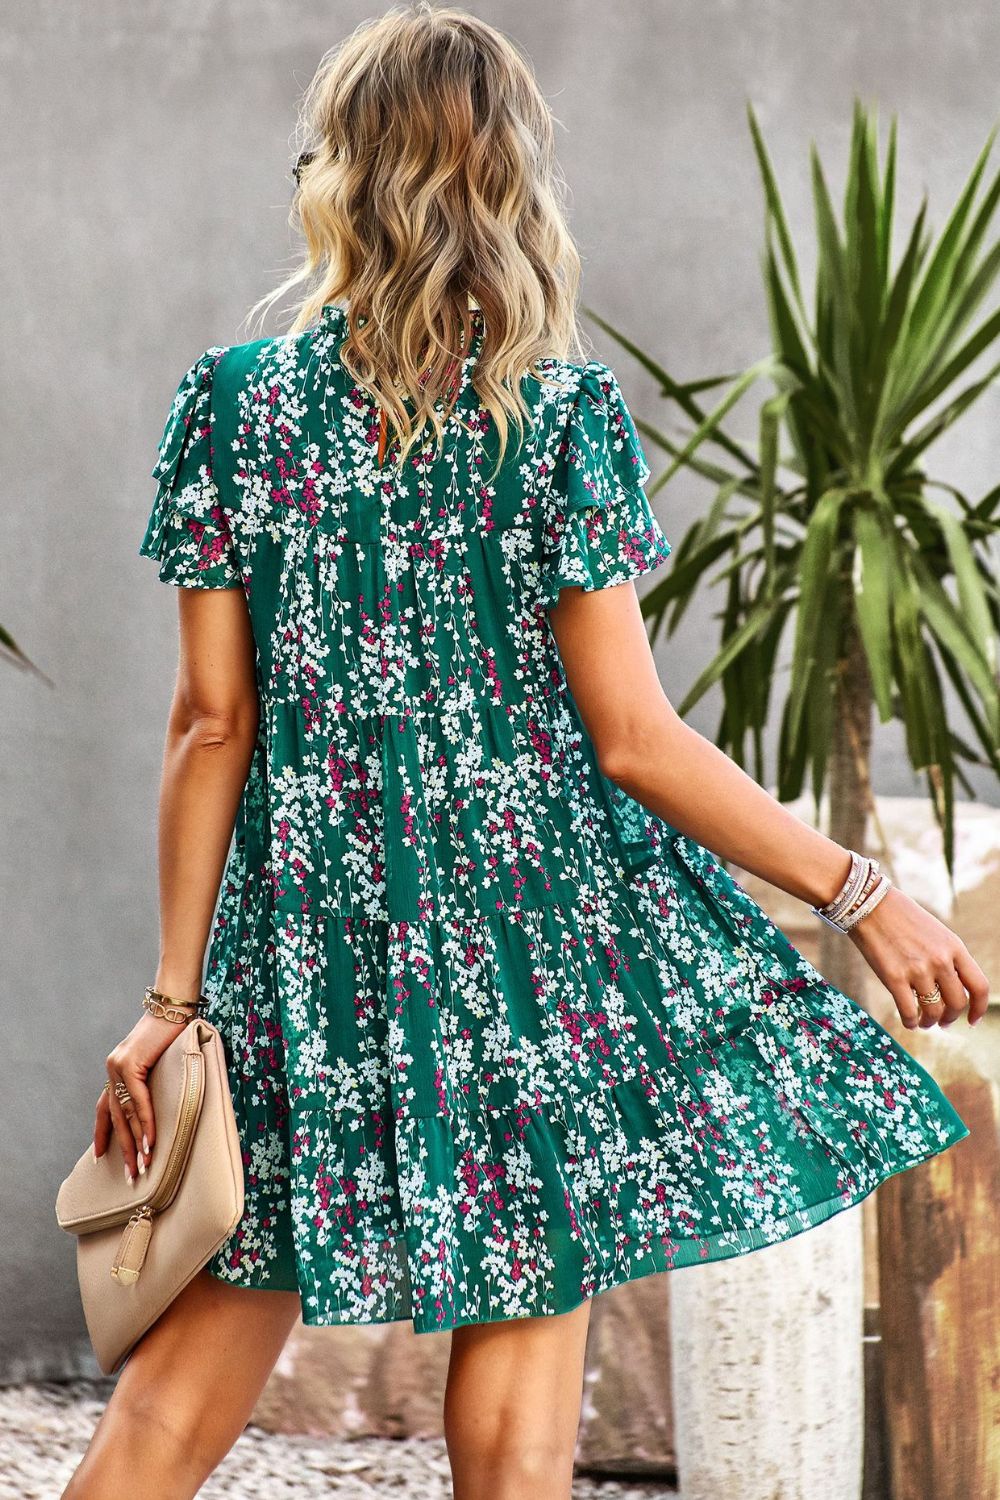 Summer Chic: Floral Layered Flutter Sleeve Dress - Perfect for Beach Weddings and Party Attire